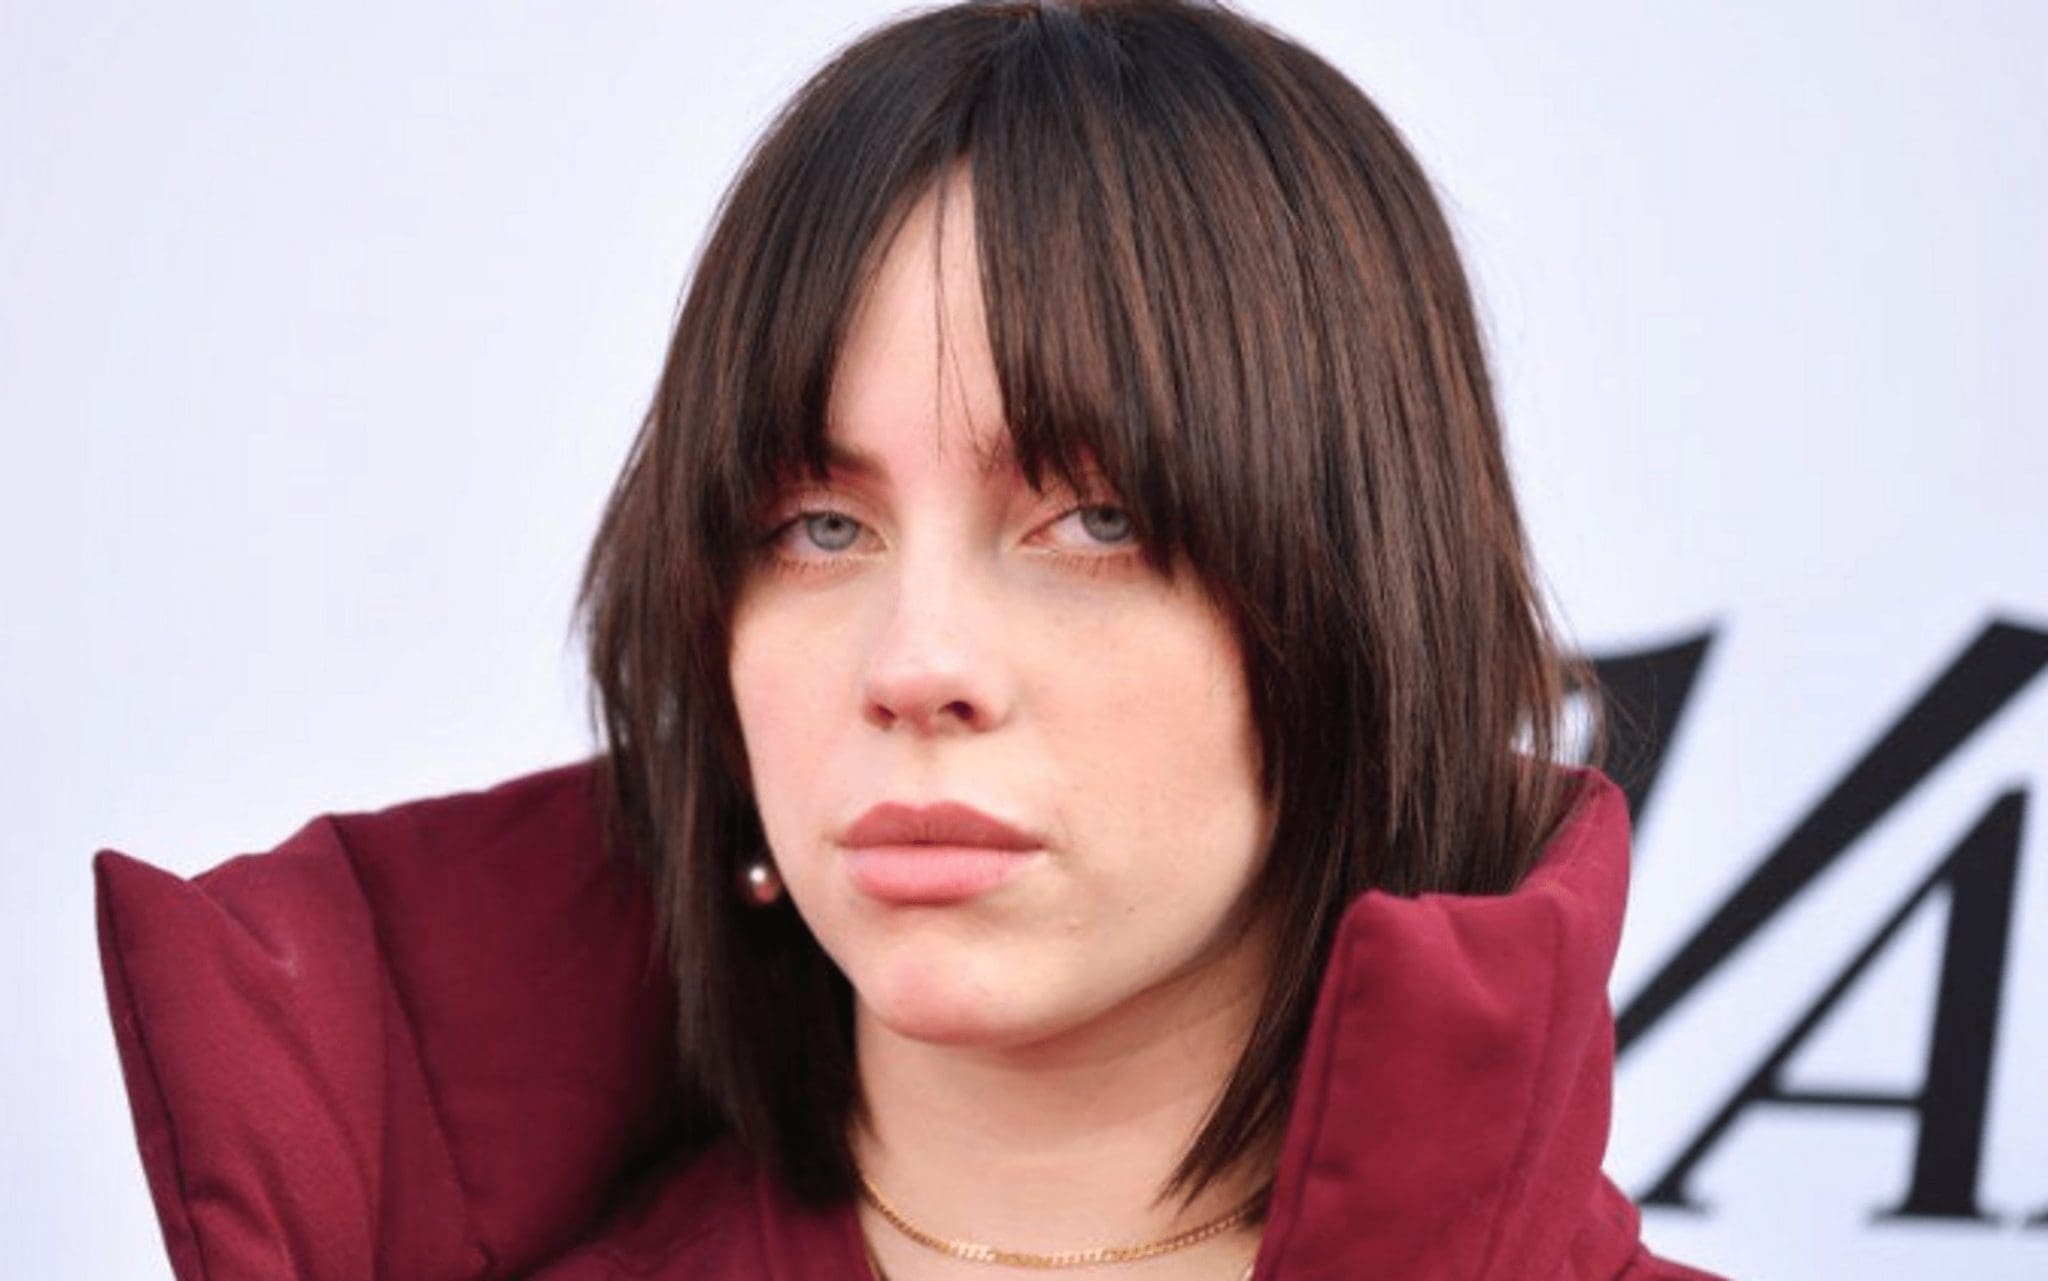 20-Year-Old Billie Eilish provoked a scandal with her statement about children